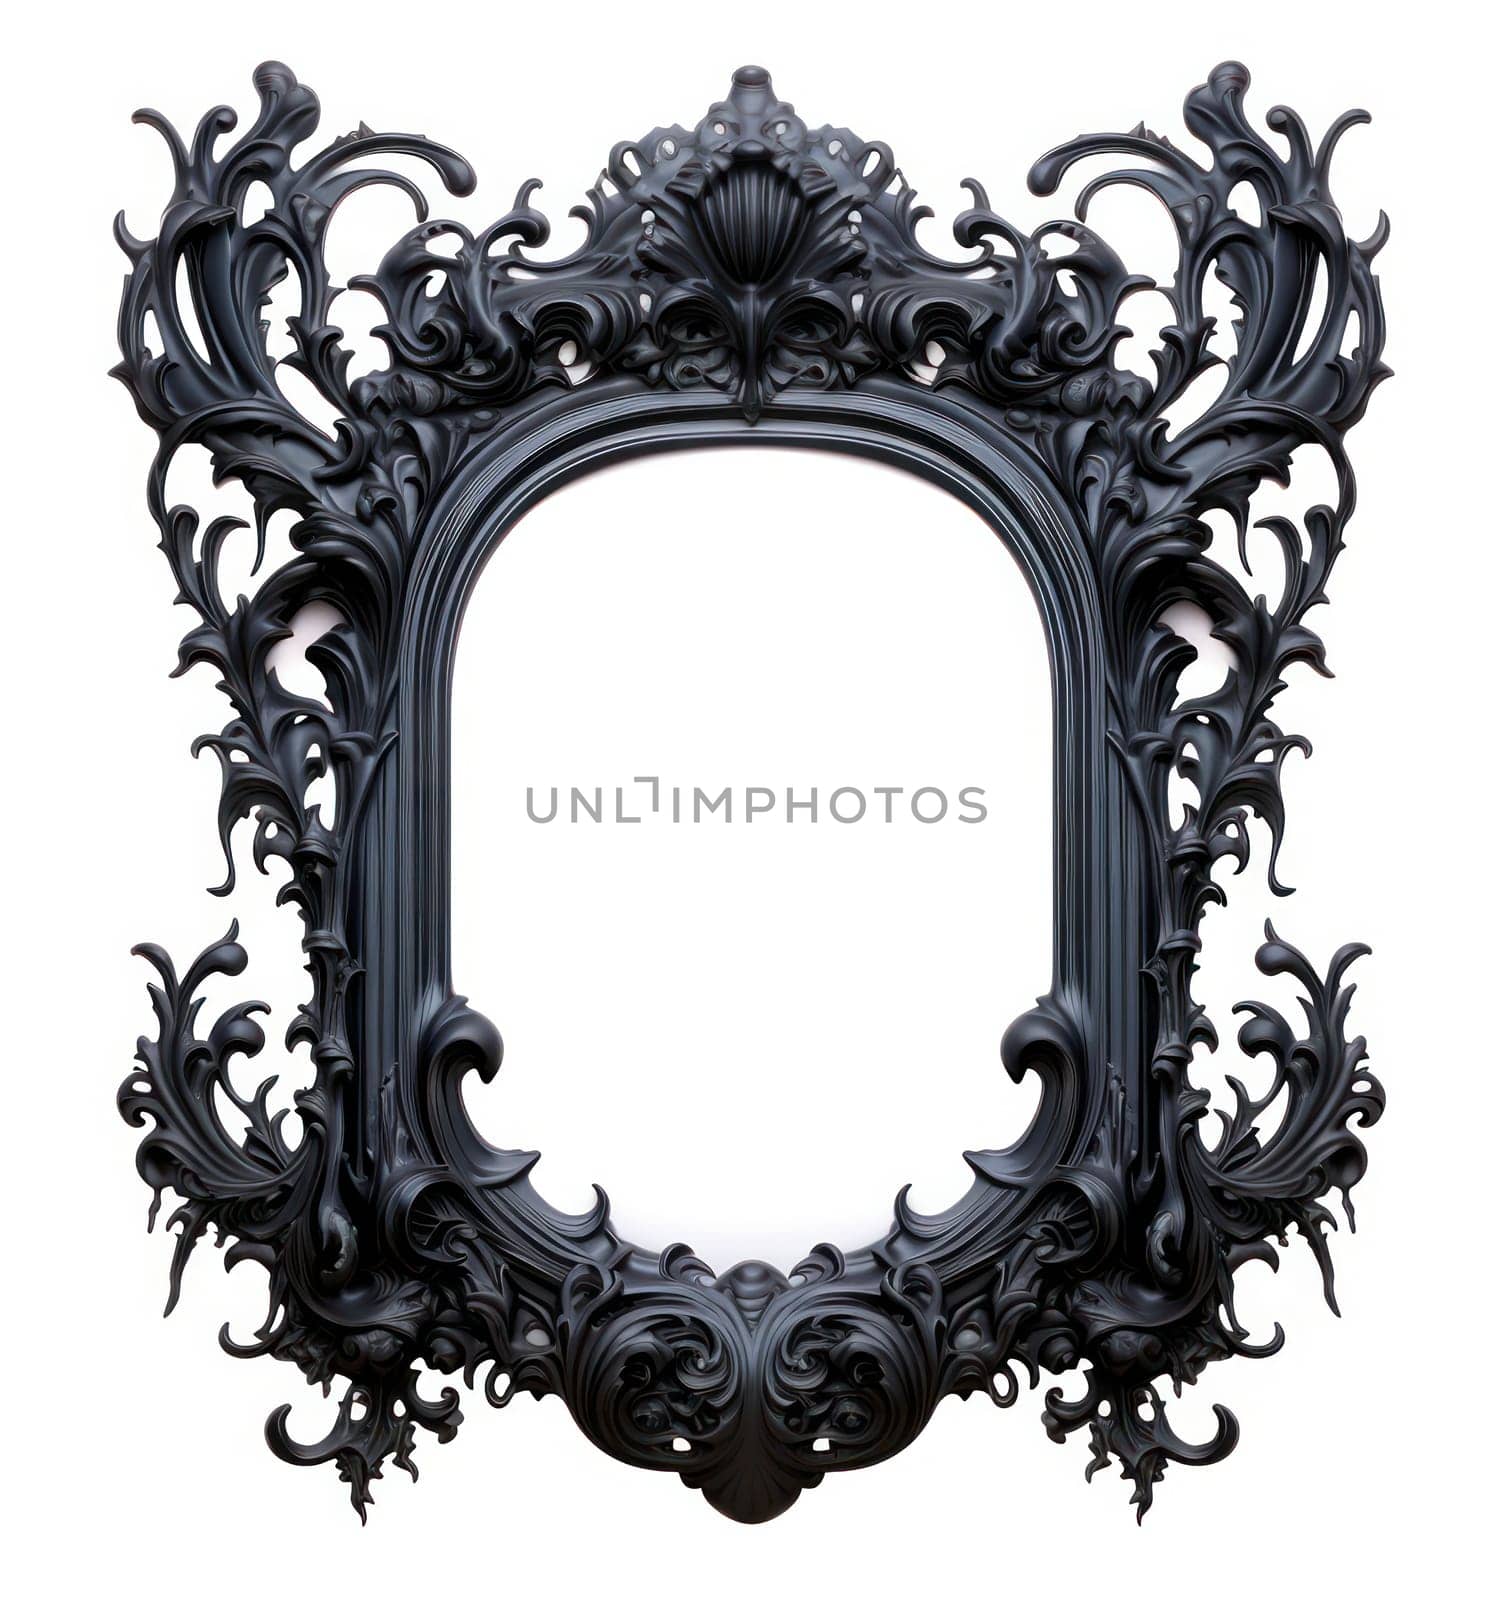 Ancient Elegance: Ornate Antique Picture Frame with Golden Baroque Design on White Background by Vichizh